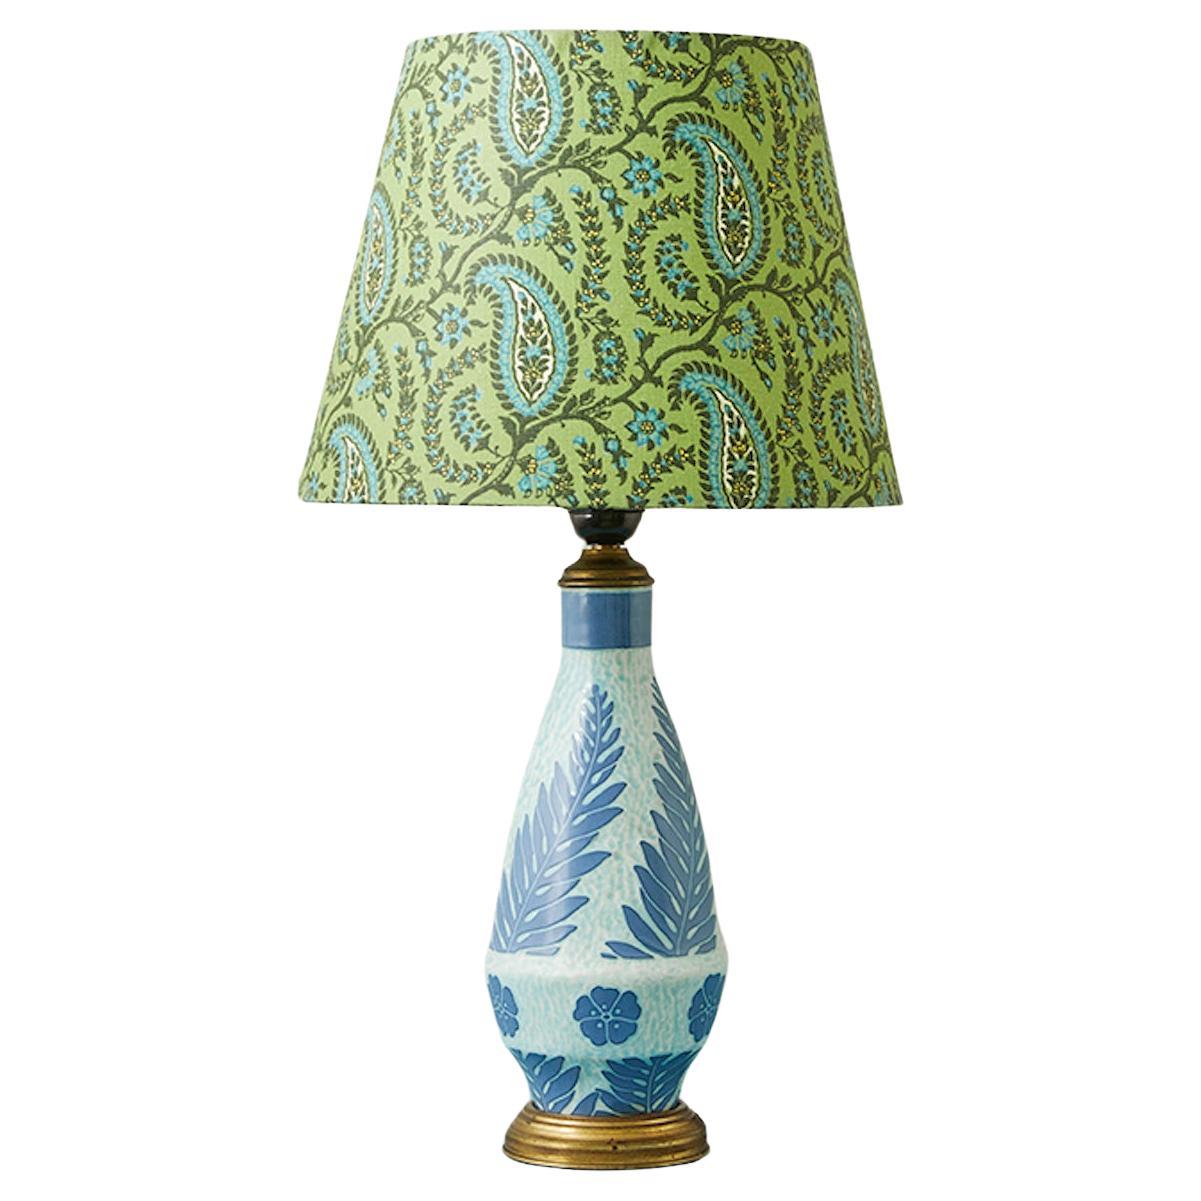 Vintage Josef Ekberg Ceramic Table Lamp with Green Shade, Sweden, 20th Century For Sale